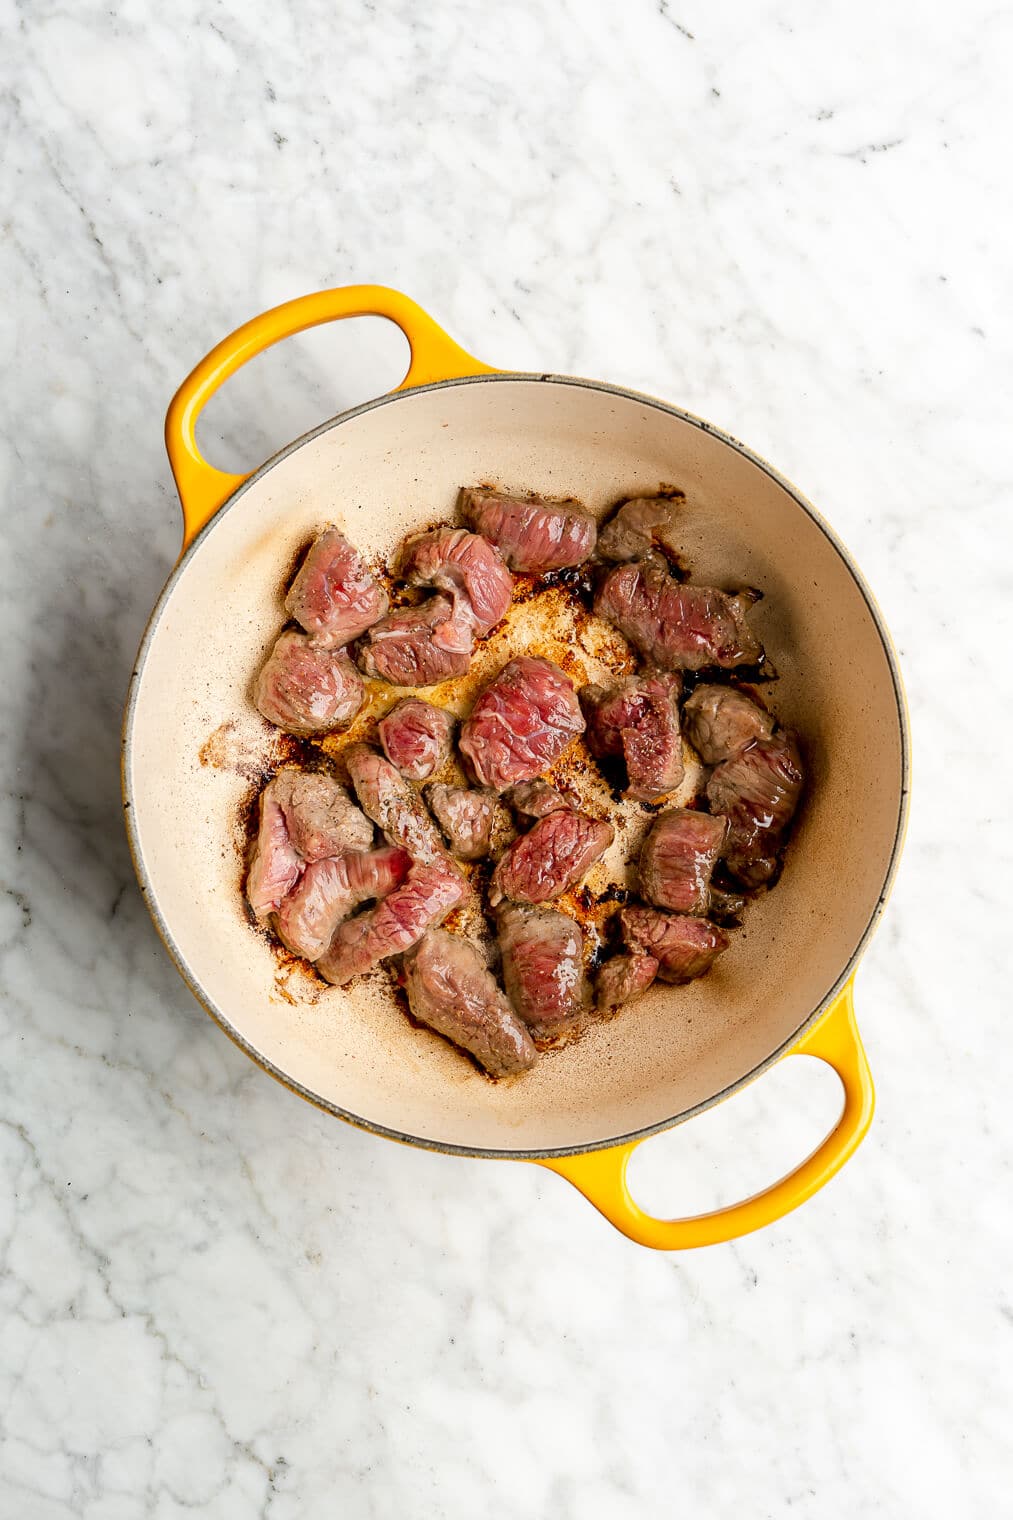 Stew meat searing in a large cast iron enameled pot.